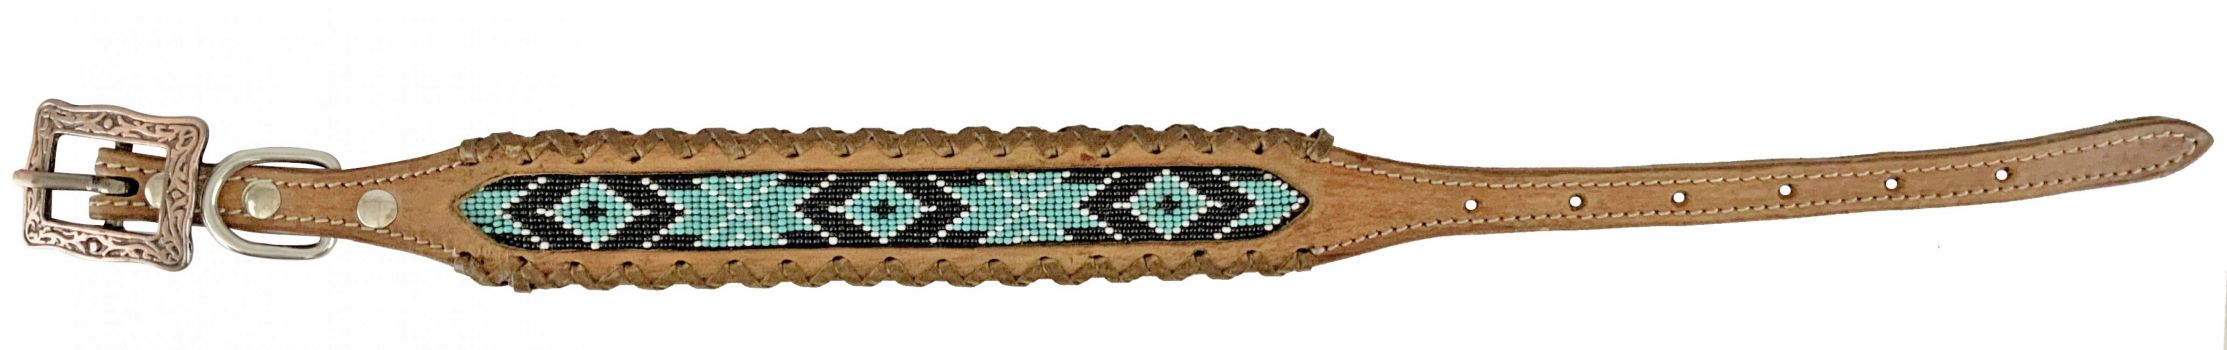 Showman Couture Genuine leather dog collar with beaded inlay - black, white, and teal